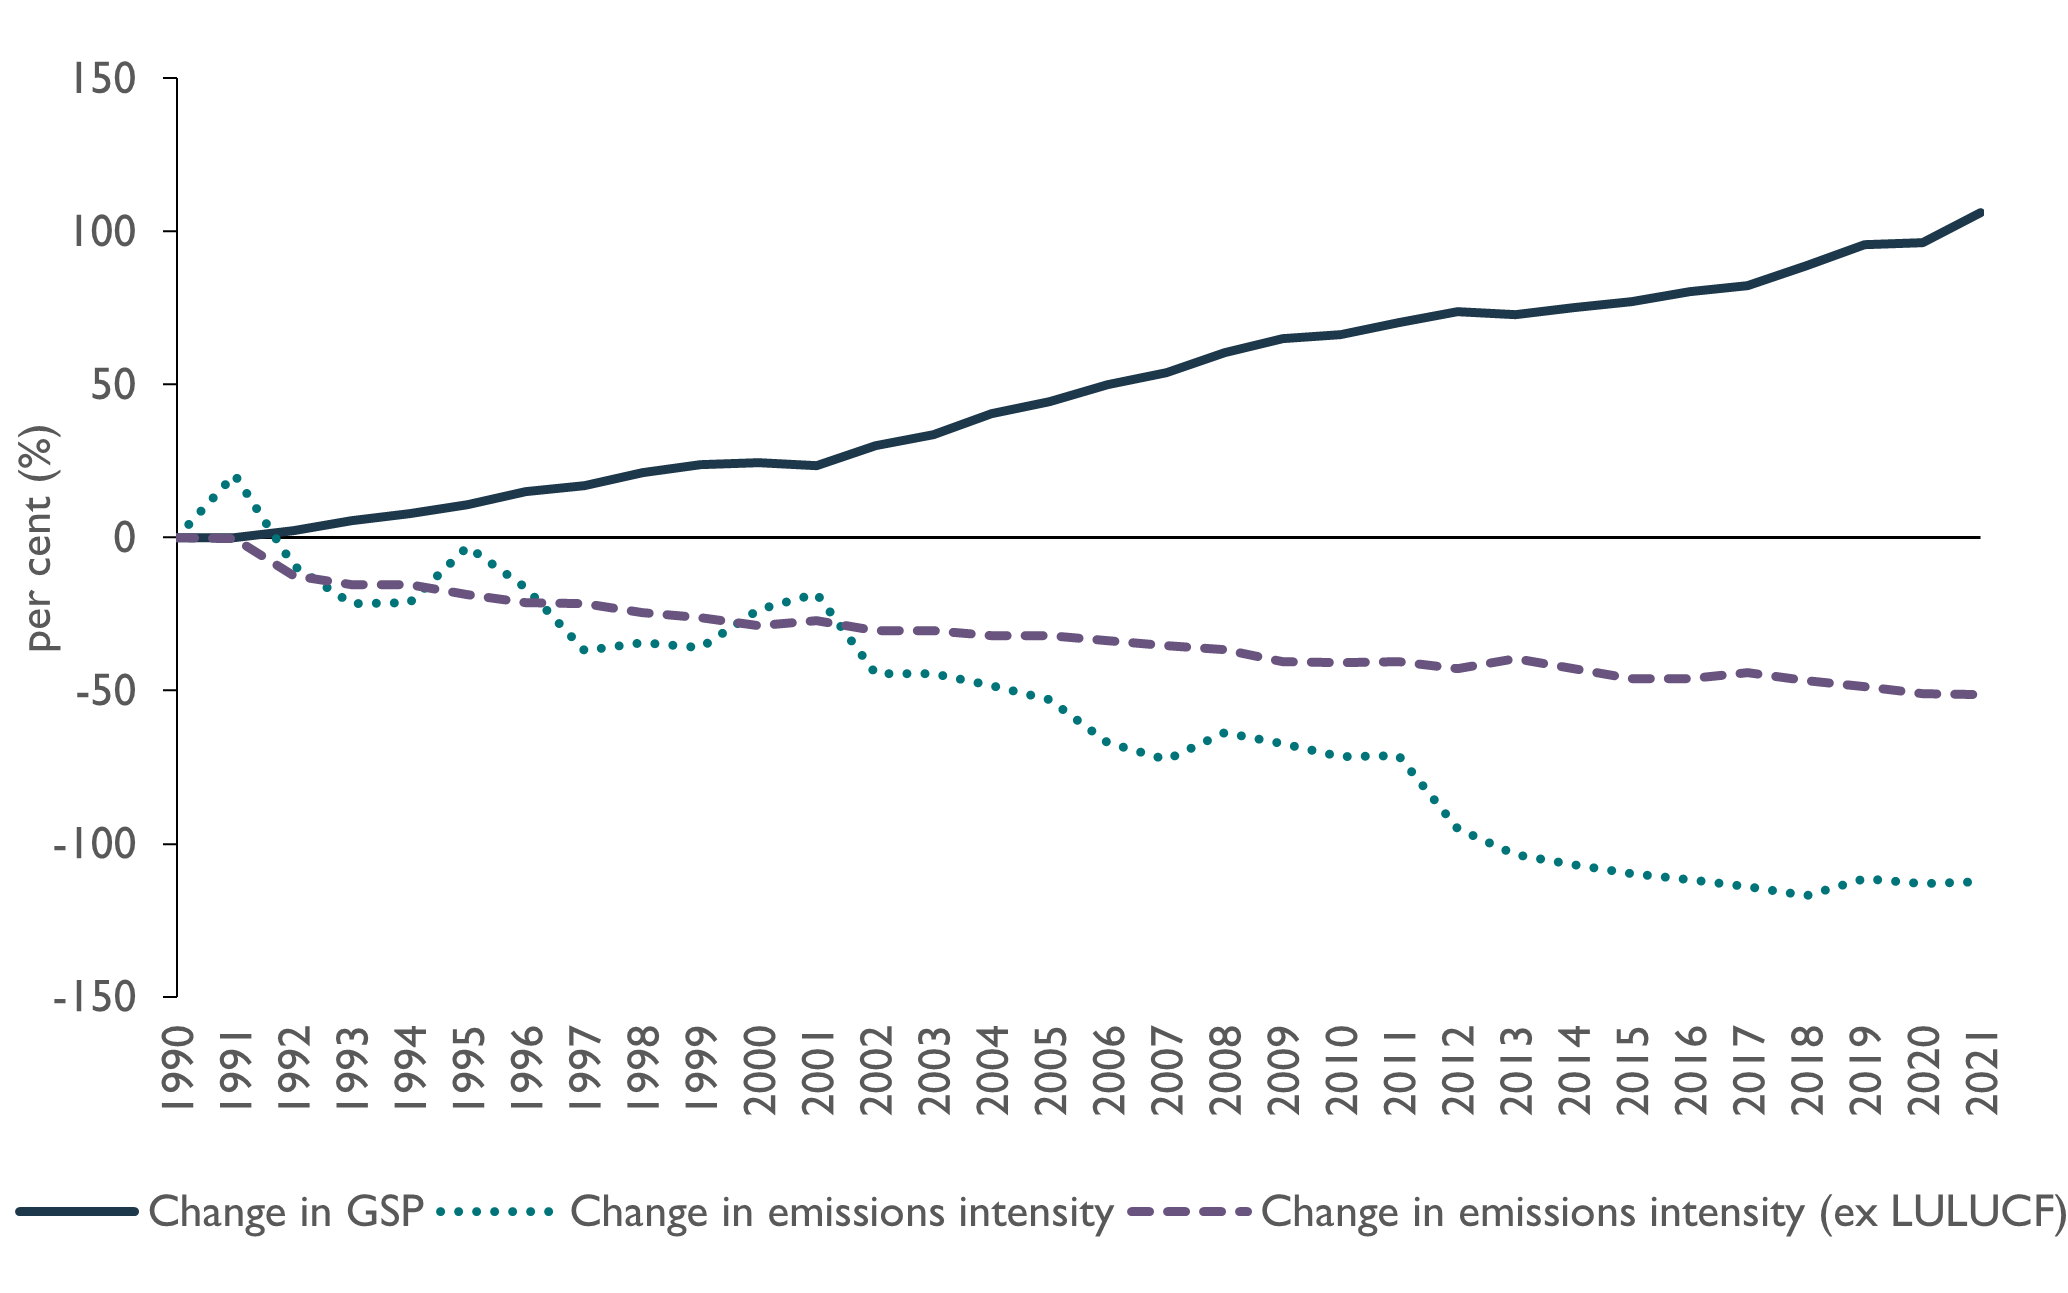 This figure is a line chart showing the percentage change in Tasmania’s real GSP and emissions intensity, with and without the LULUCF sector, from 1990 to 2021 relative to the 1990 baseline. It shows Tasmania’s real GSP steadily increasing between 1990 and 2021, to show a total change of 106.2 per cent. When LULUCF is included, it shows a downward trend in the emissions intensity of the Tasmanian economy, to a figure of minus 112.35 per cent. When LULUCF is excluded, it shows a largely constant downward trend since 1991, with the emissions intensity of the Tasmanian economy having declined by 51.3 per cent in 2021.